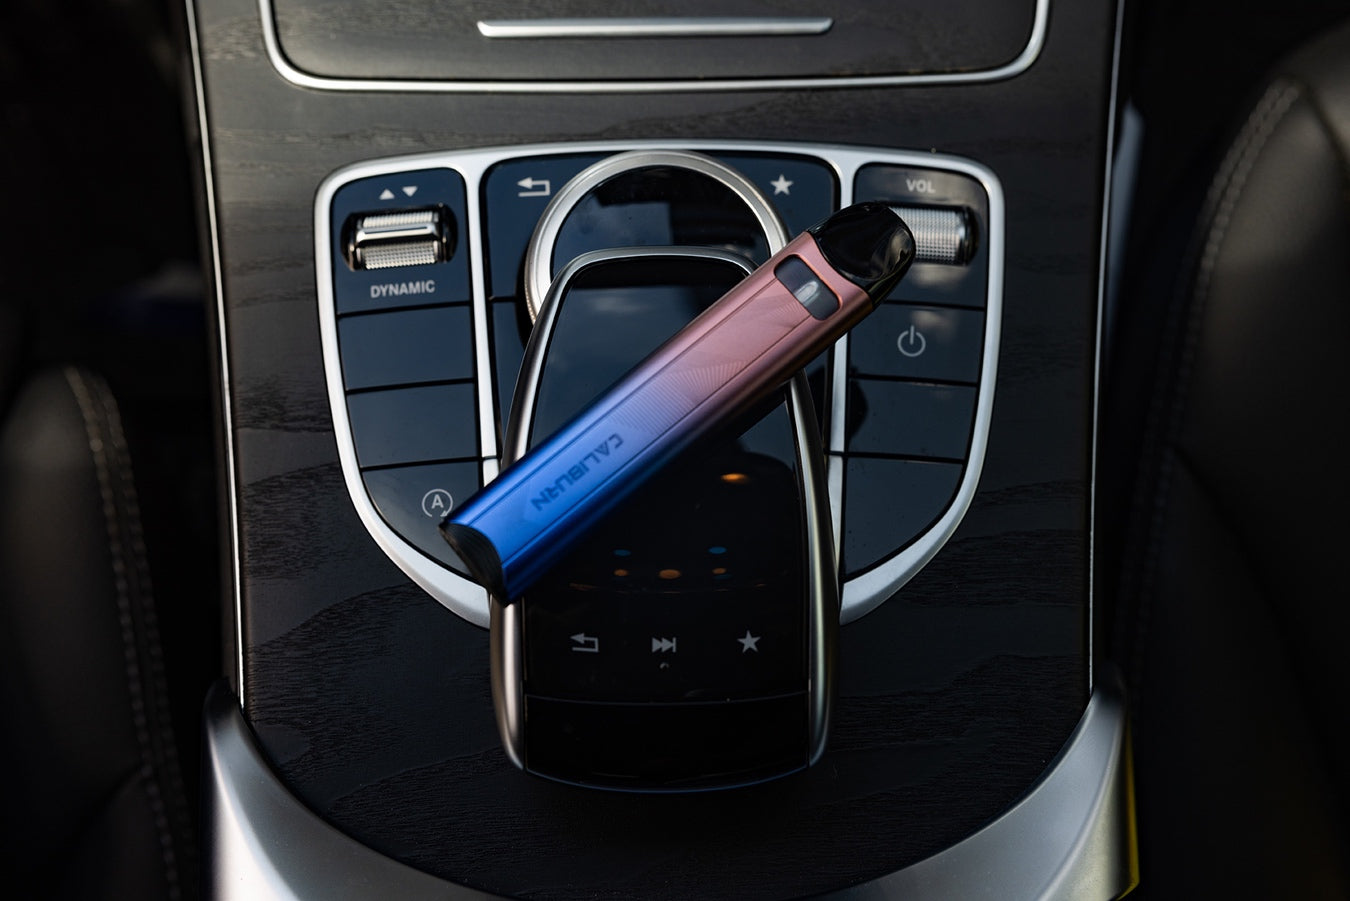 UWell Caliburn A3S resting on side in car between uses